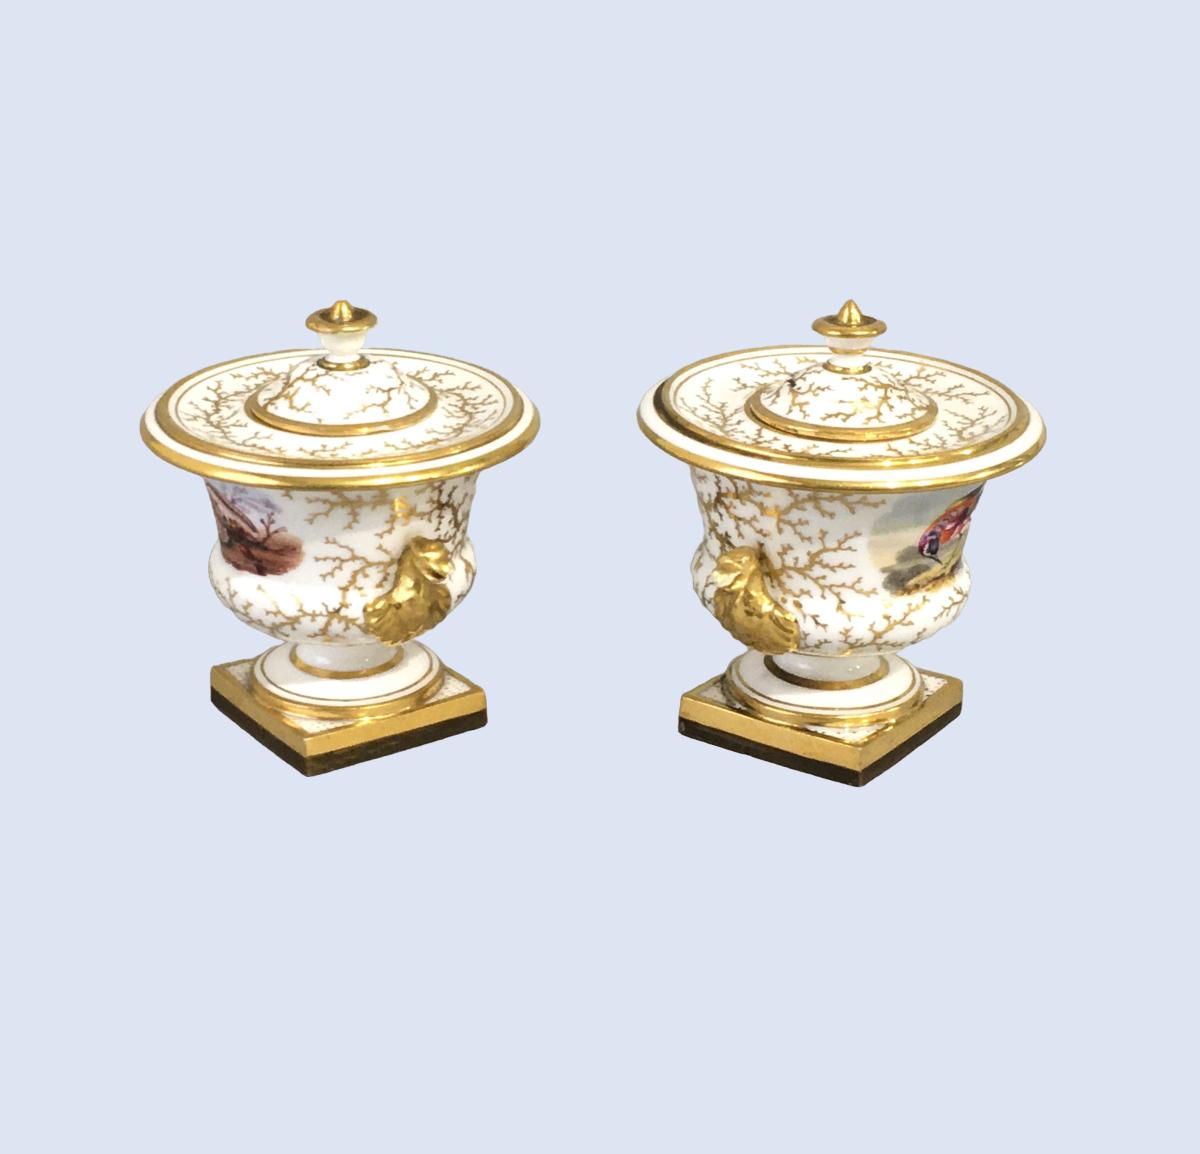 A Fine Pair of Flight Barr & Barr Worcester Porcelain Miniature Vases / Inkwells & Covers, Circa 1820.